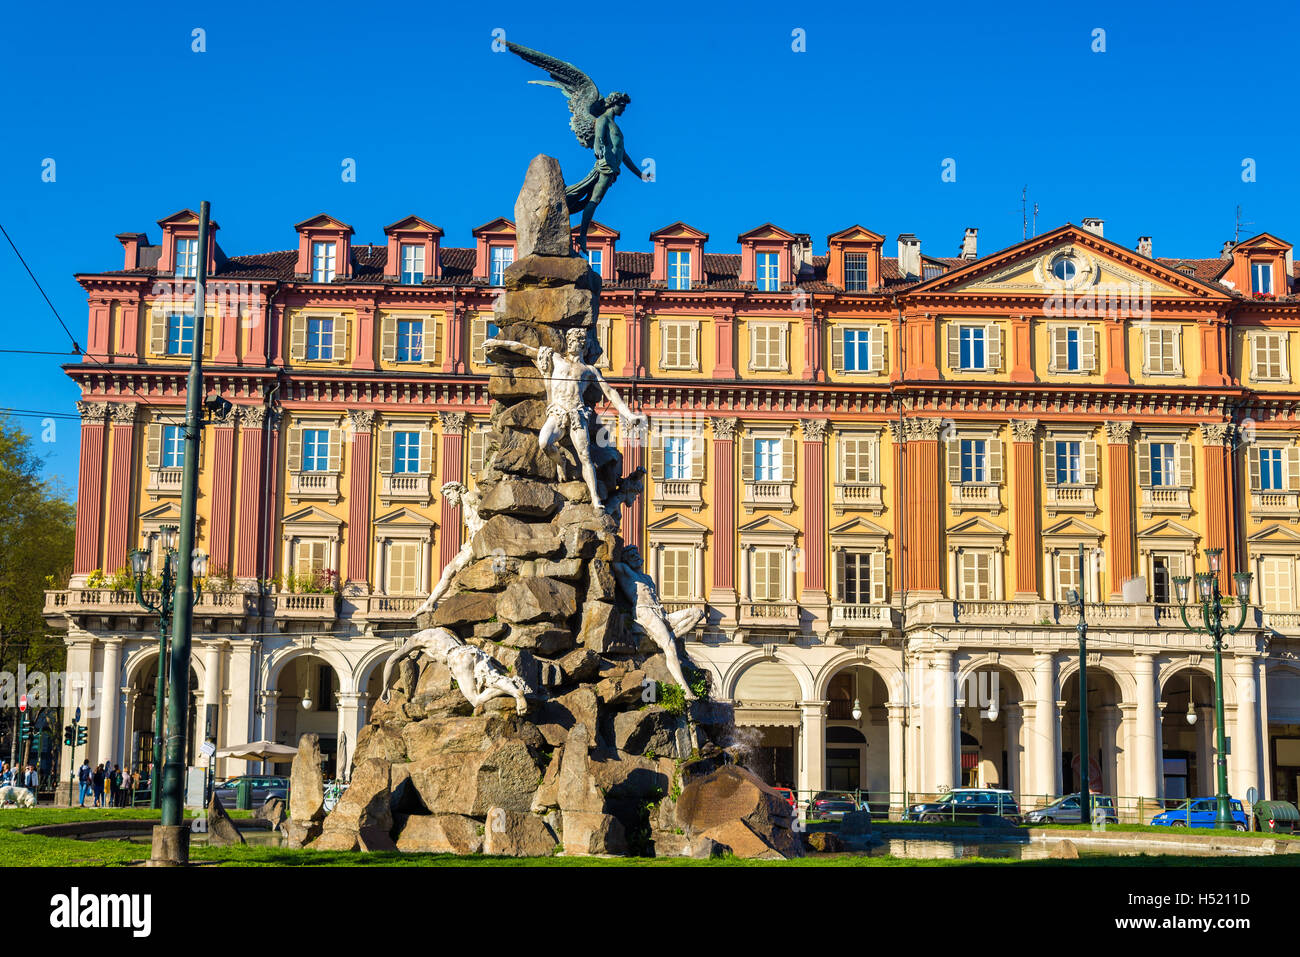 Monument to the Frejus Tunnel on Piazza Statuto in Turin - Italy Stock Photo